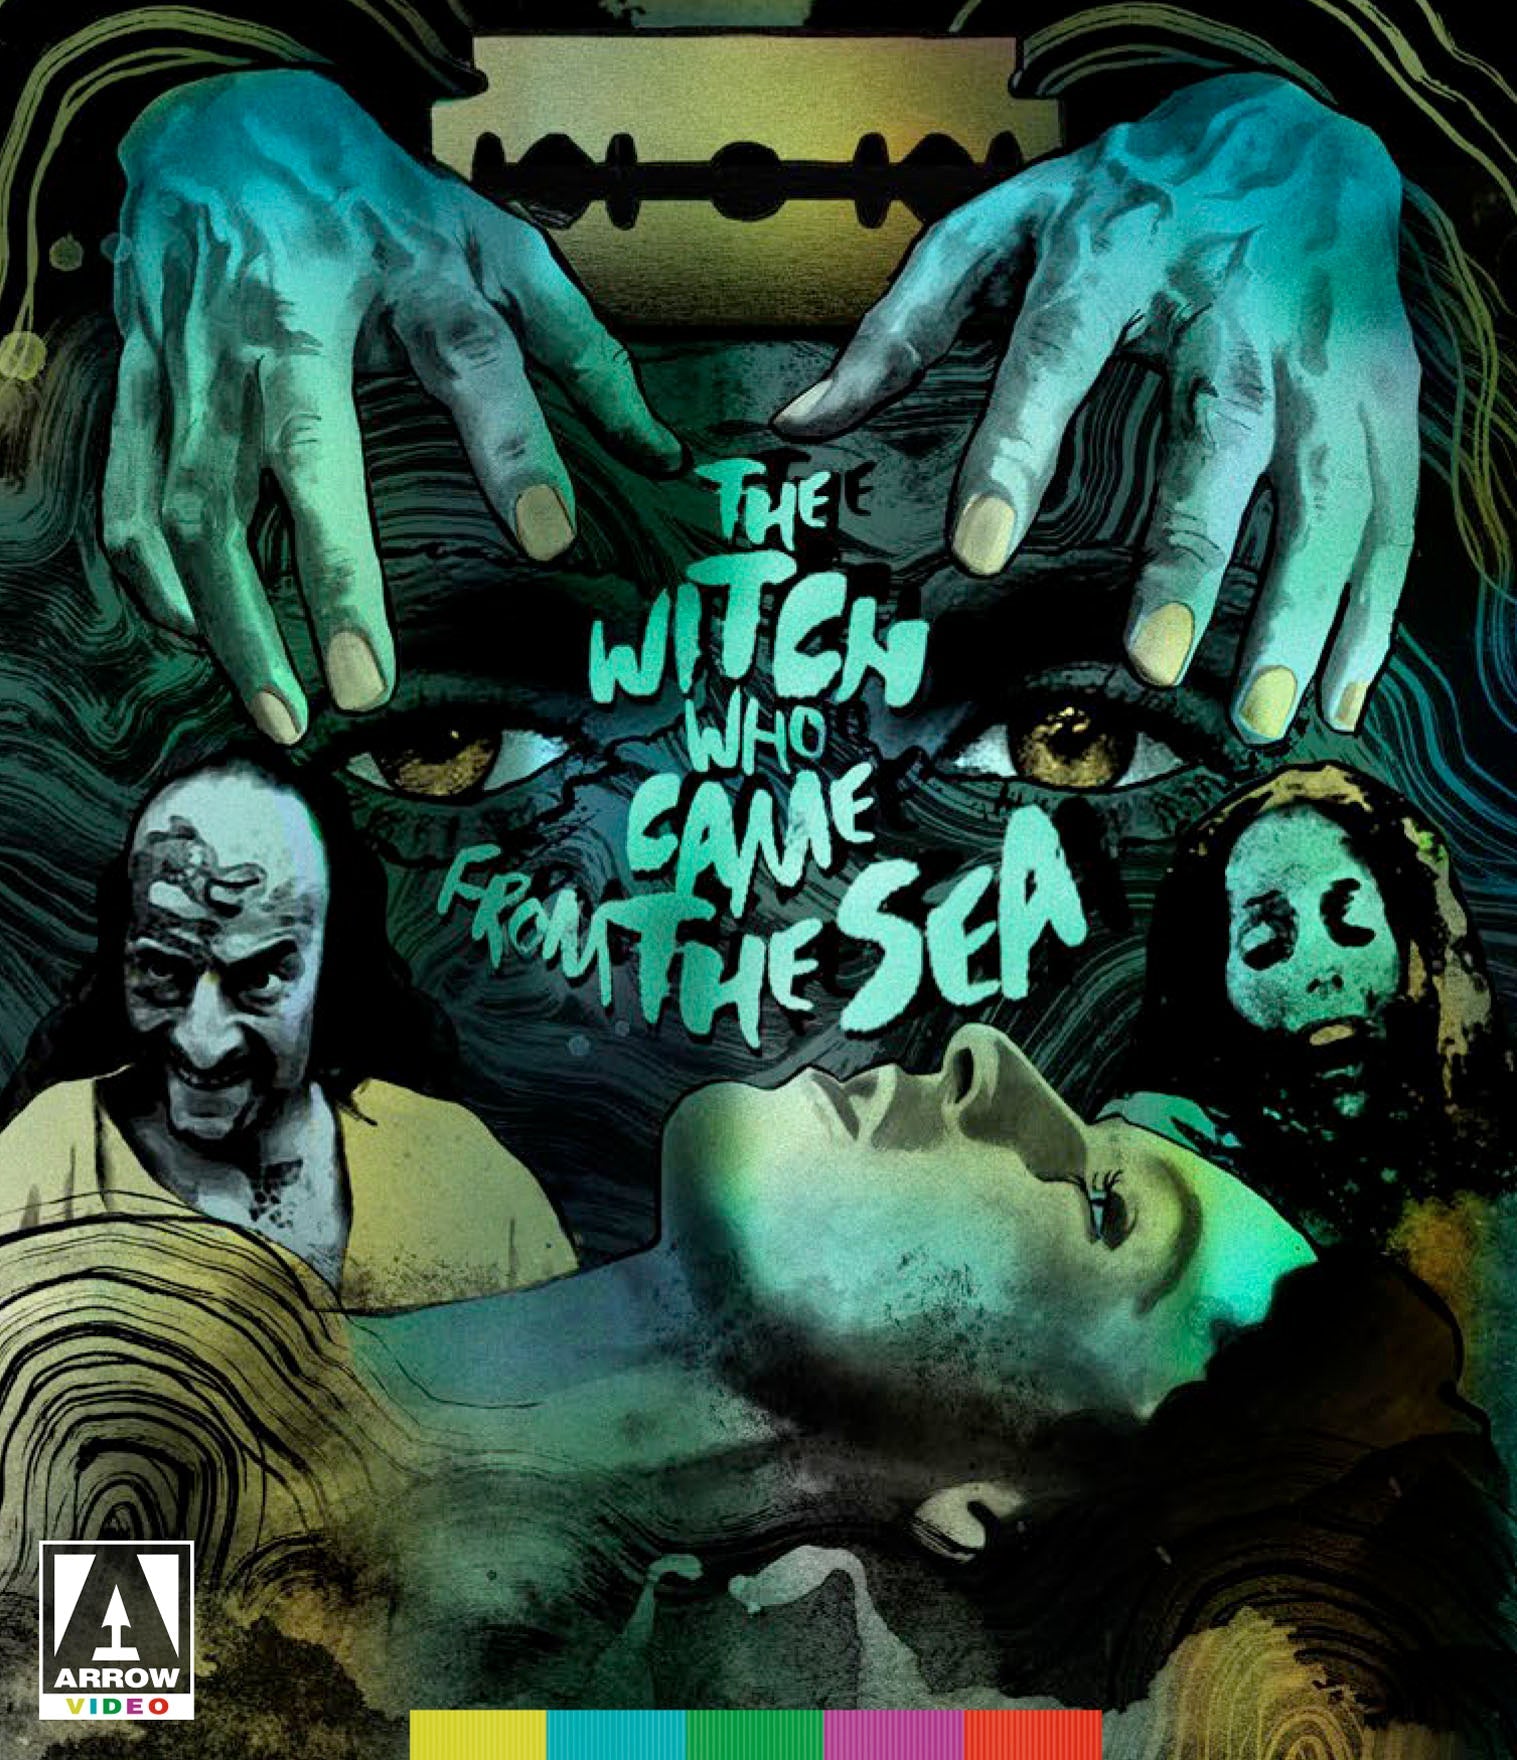 The Witch Who Came From Sea Blu-Ray Blu-Ray